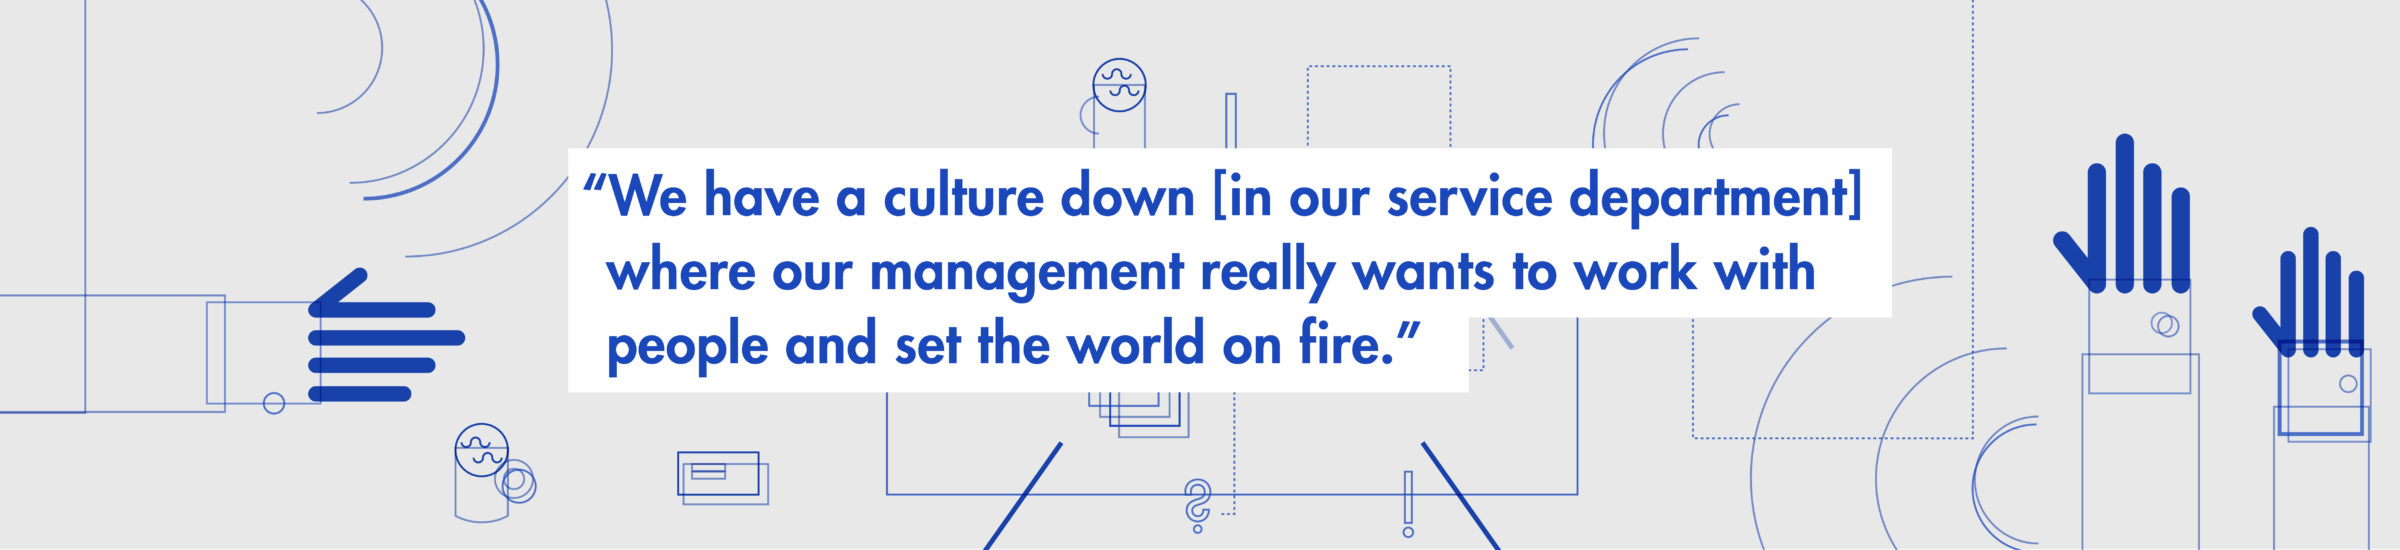 "We have a culture down in our service department where our management really wants to work with people and set the world on fire."